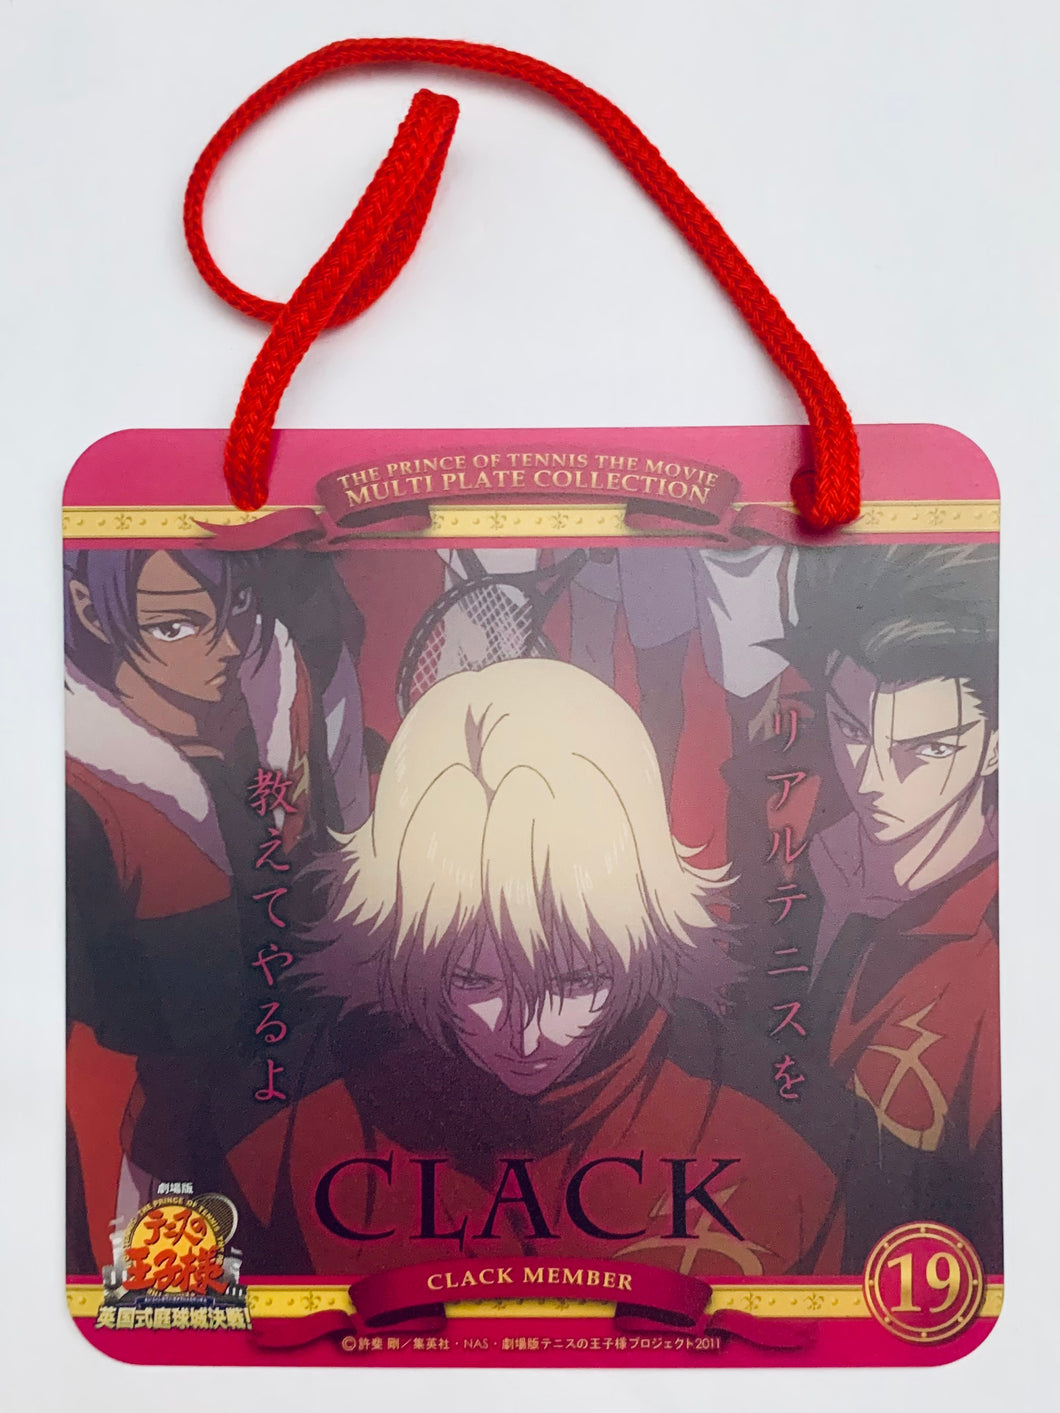 The Prince of Tennis: The Movie - Clack Member - Multi Plate Collection - No. 19